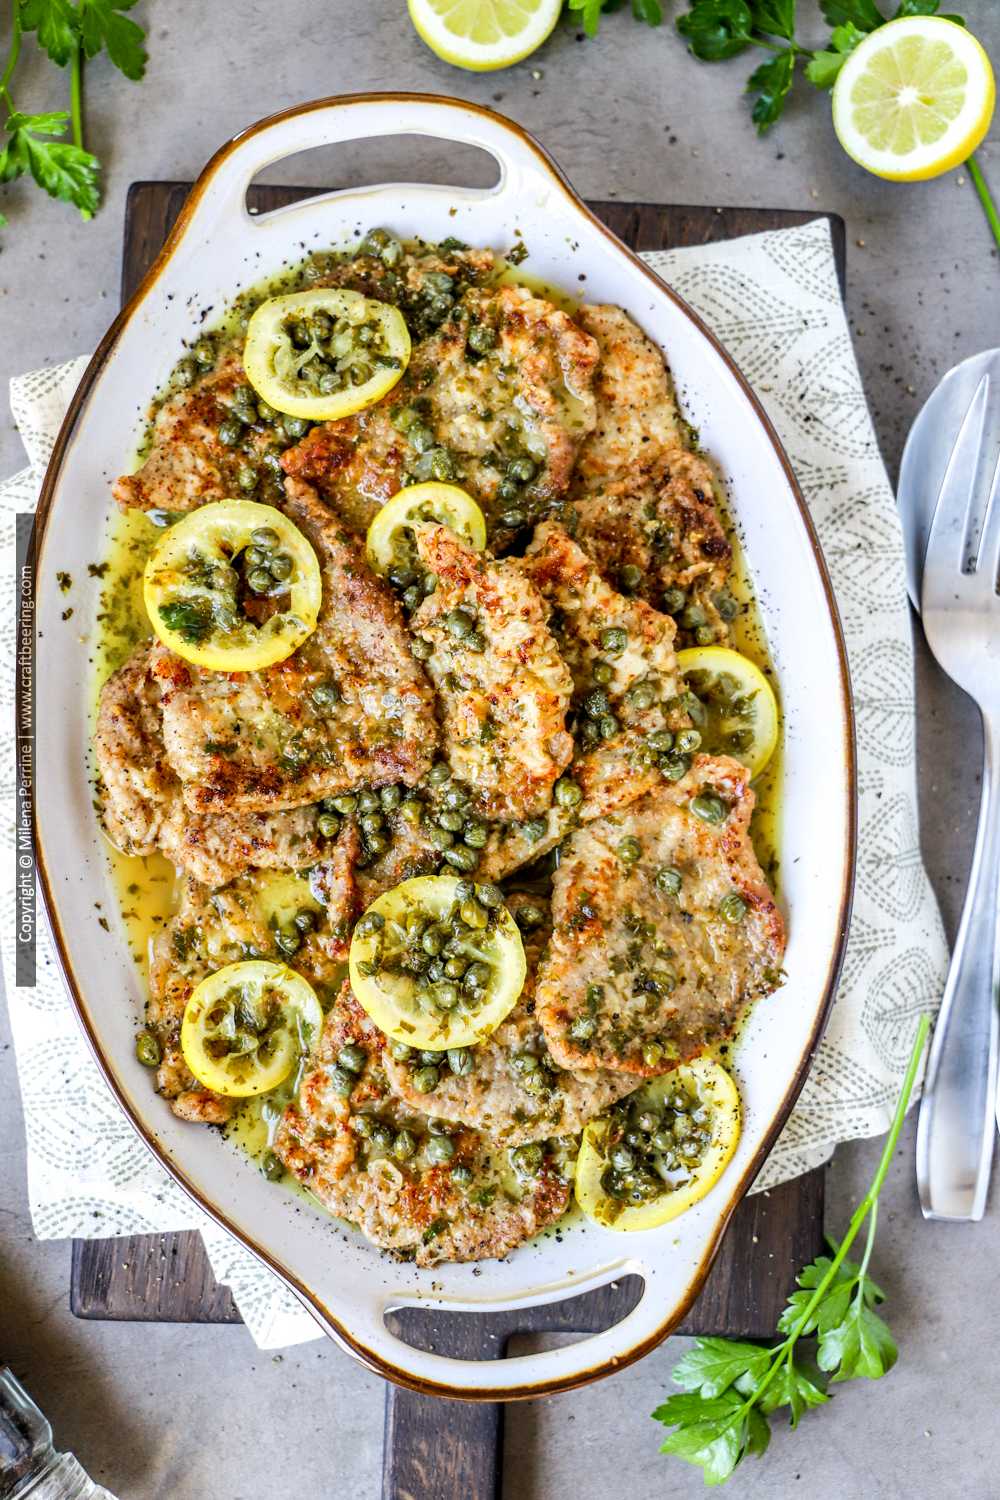 Veal piccata - classic preparation with white wine, chicken stock, capers, butter and lemon. 